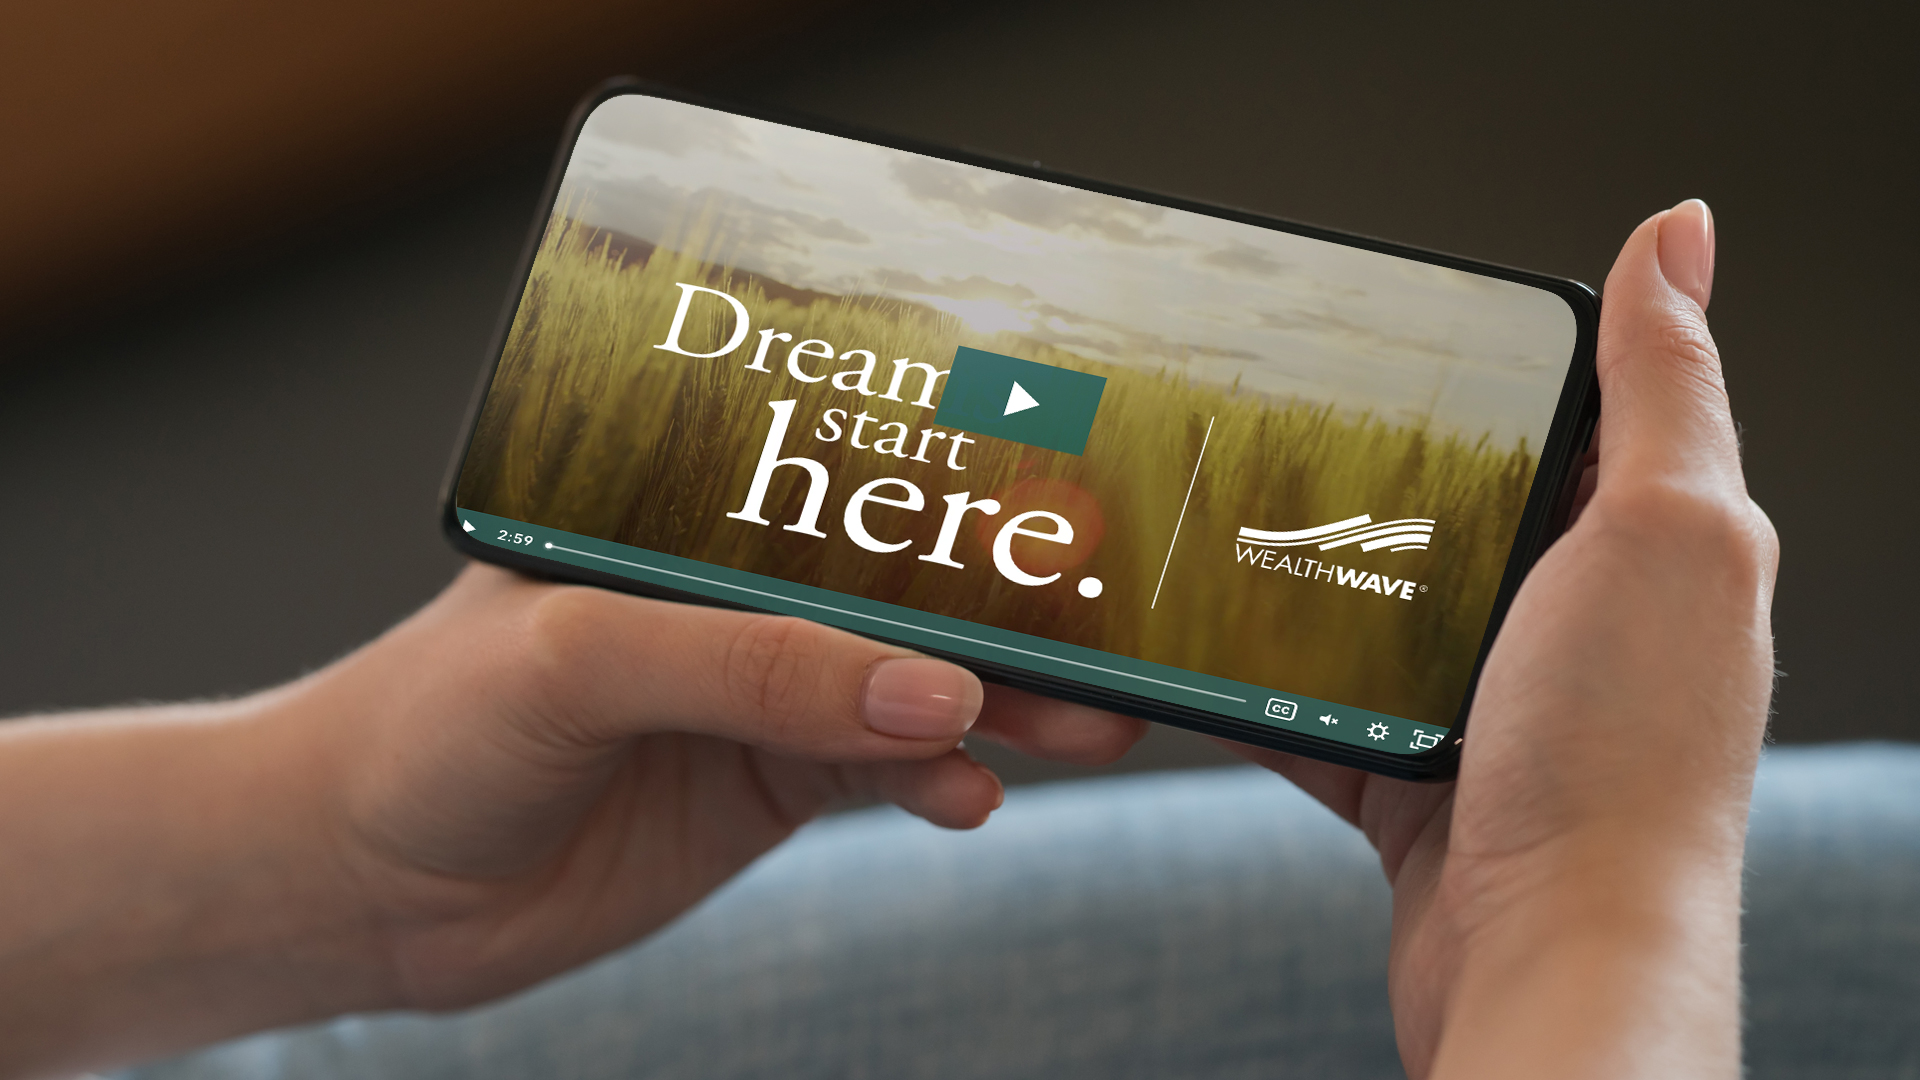 "Dreams Start Here" Video: A True Classic, still a core part of our WealthWave marketing